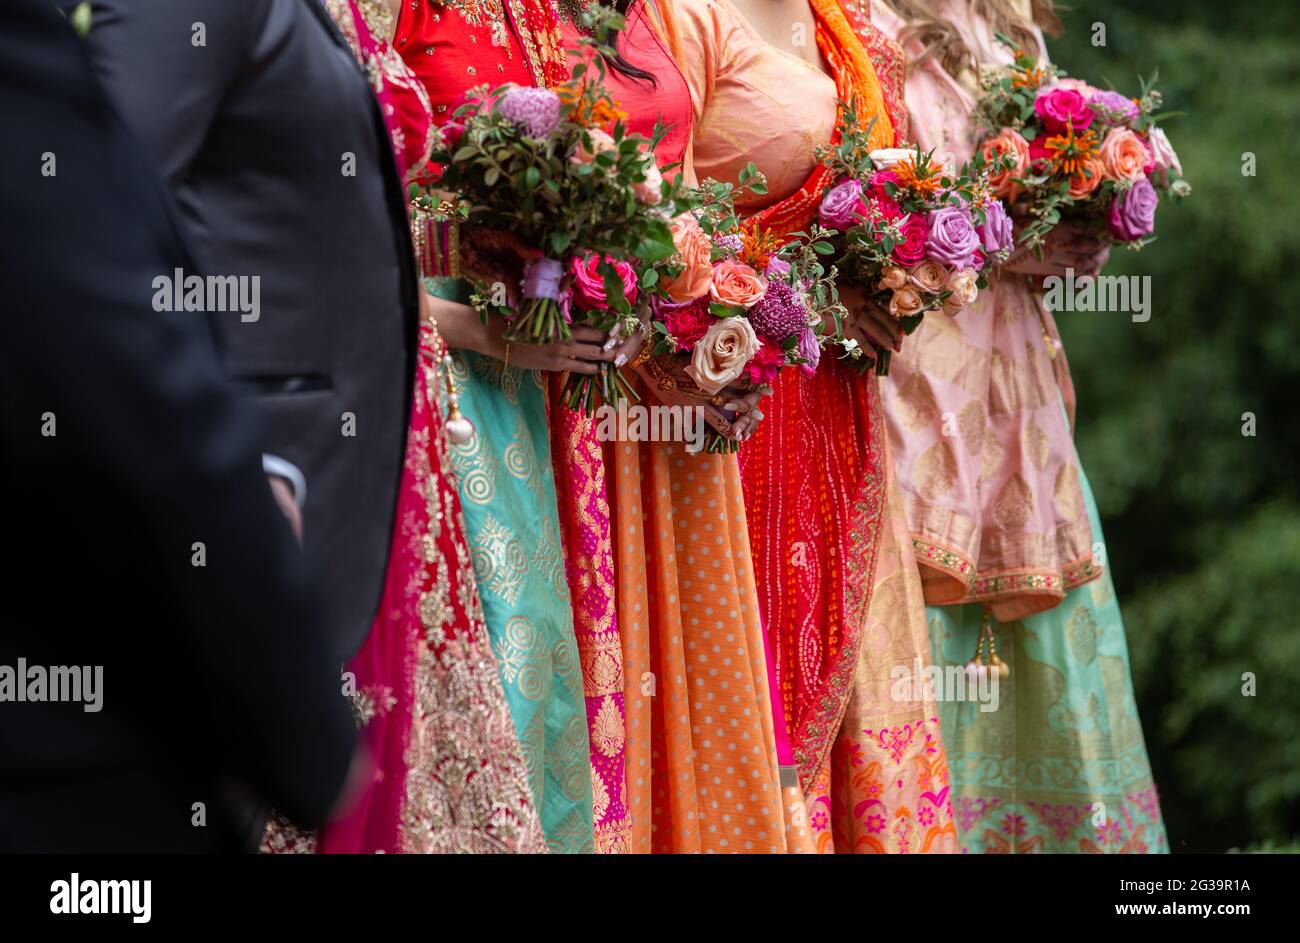 Bride and bridesmaids wearing saris and holding flowers at a wedding in Australia Stock Photo